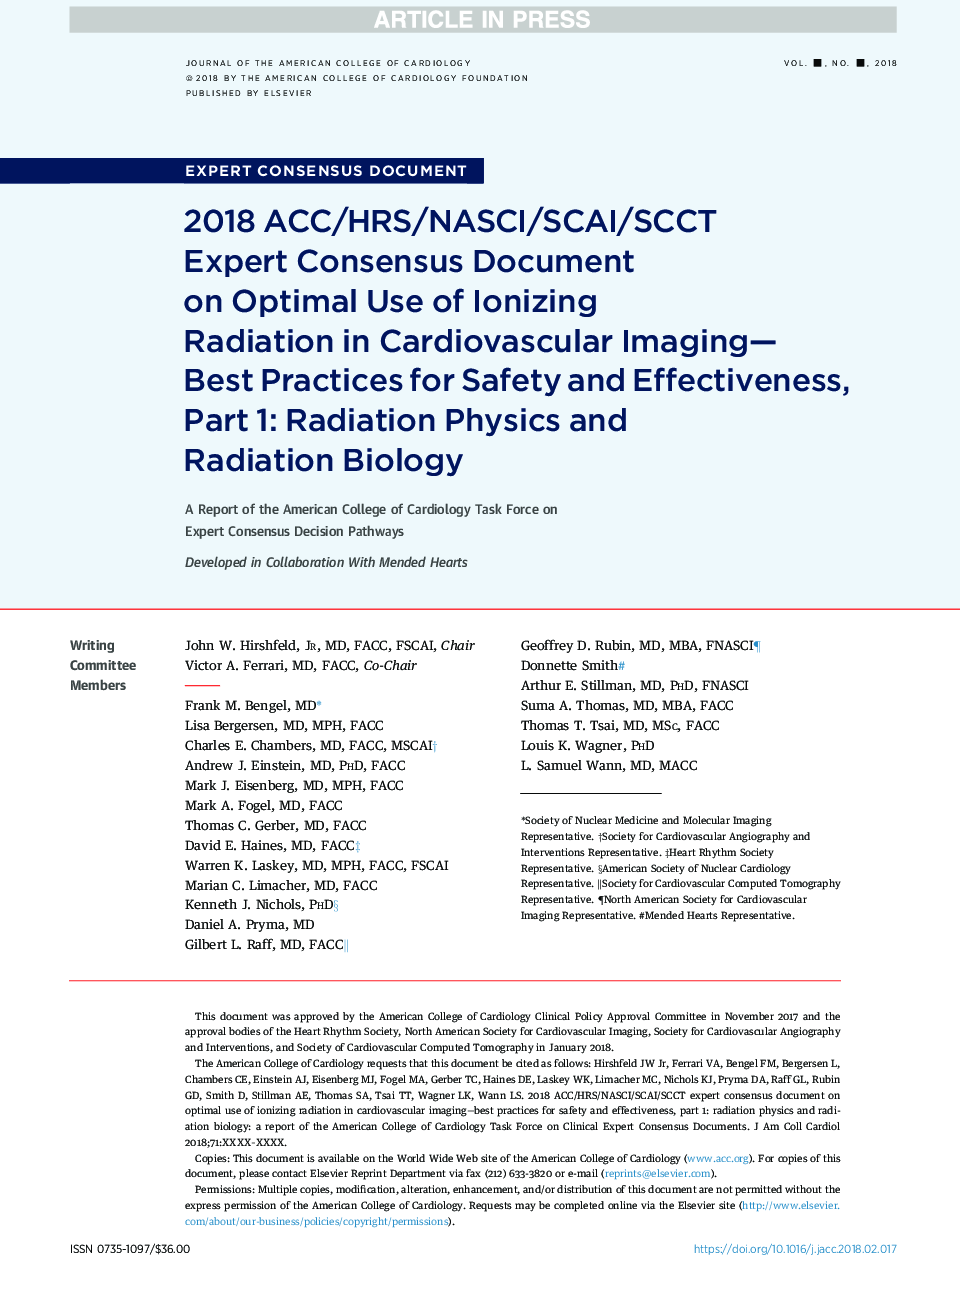 2018 ACC/HRS/NASCI/SCAI/SCCT Expert Consensus Document onÂ Optimal Use of Ionizing Radiation inÂ Cardiovascular Imaging-Best Practices for Safety and Effectiveness, Part 1: Radiation Physics and RadiationÂ Biology